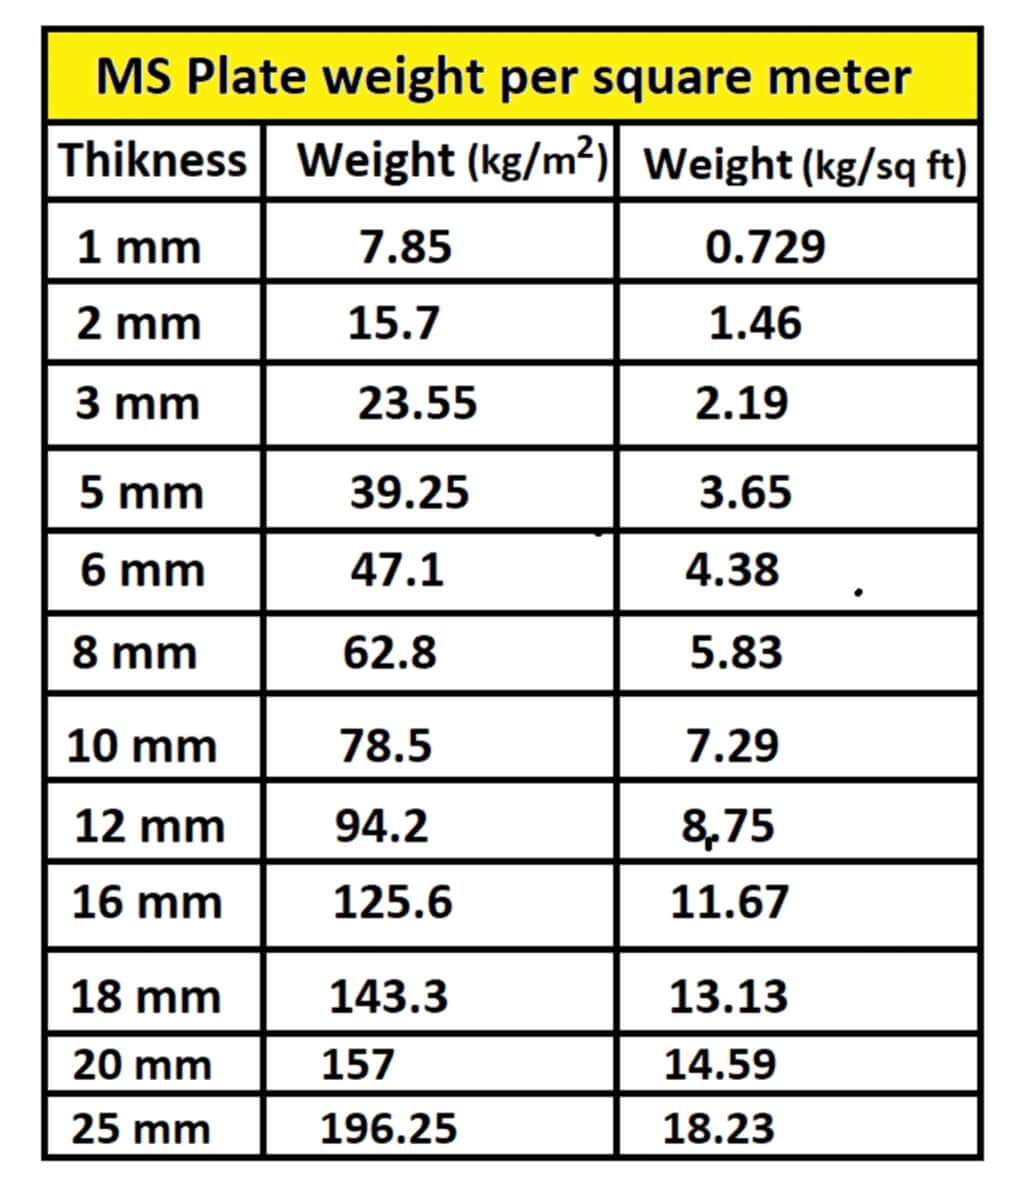 MS plate weight per square meter (sqm, kg/m2)